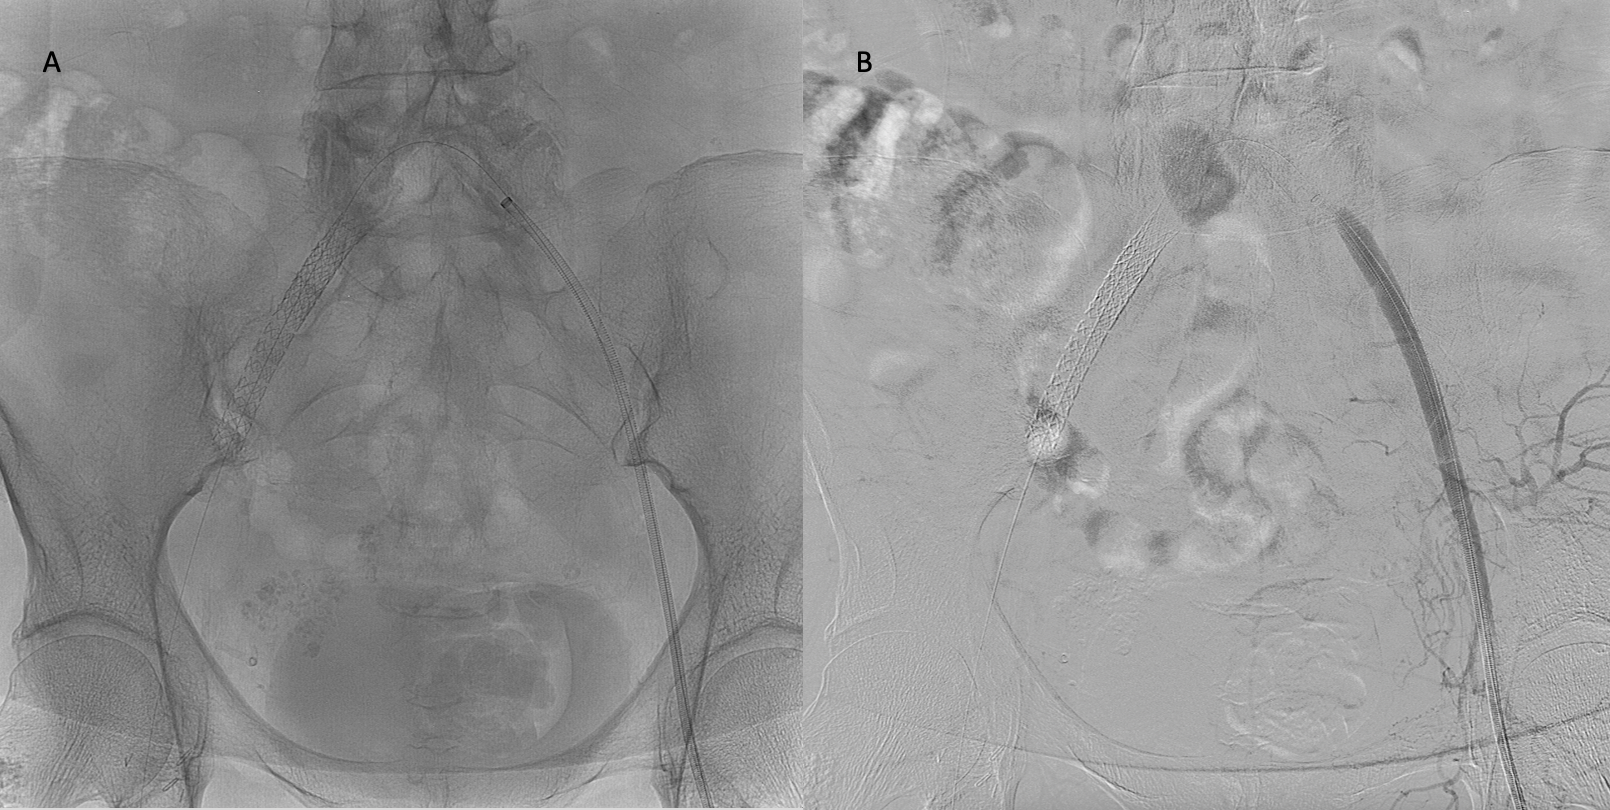 Image A shows normal fluoroscopy while image B shows digital subtraction angiography